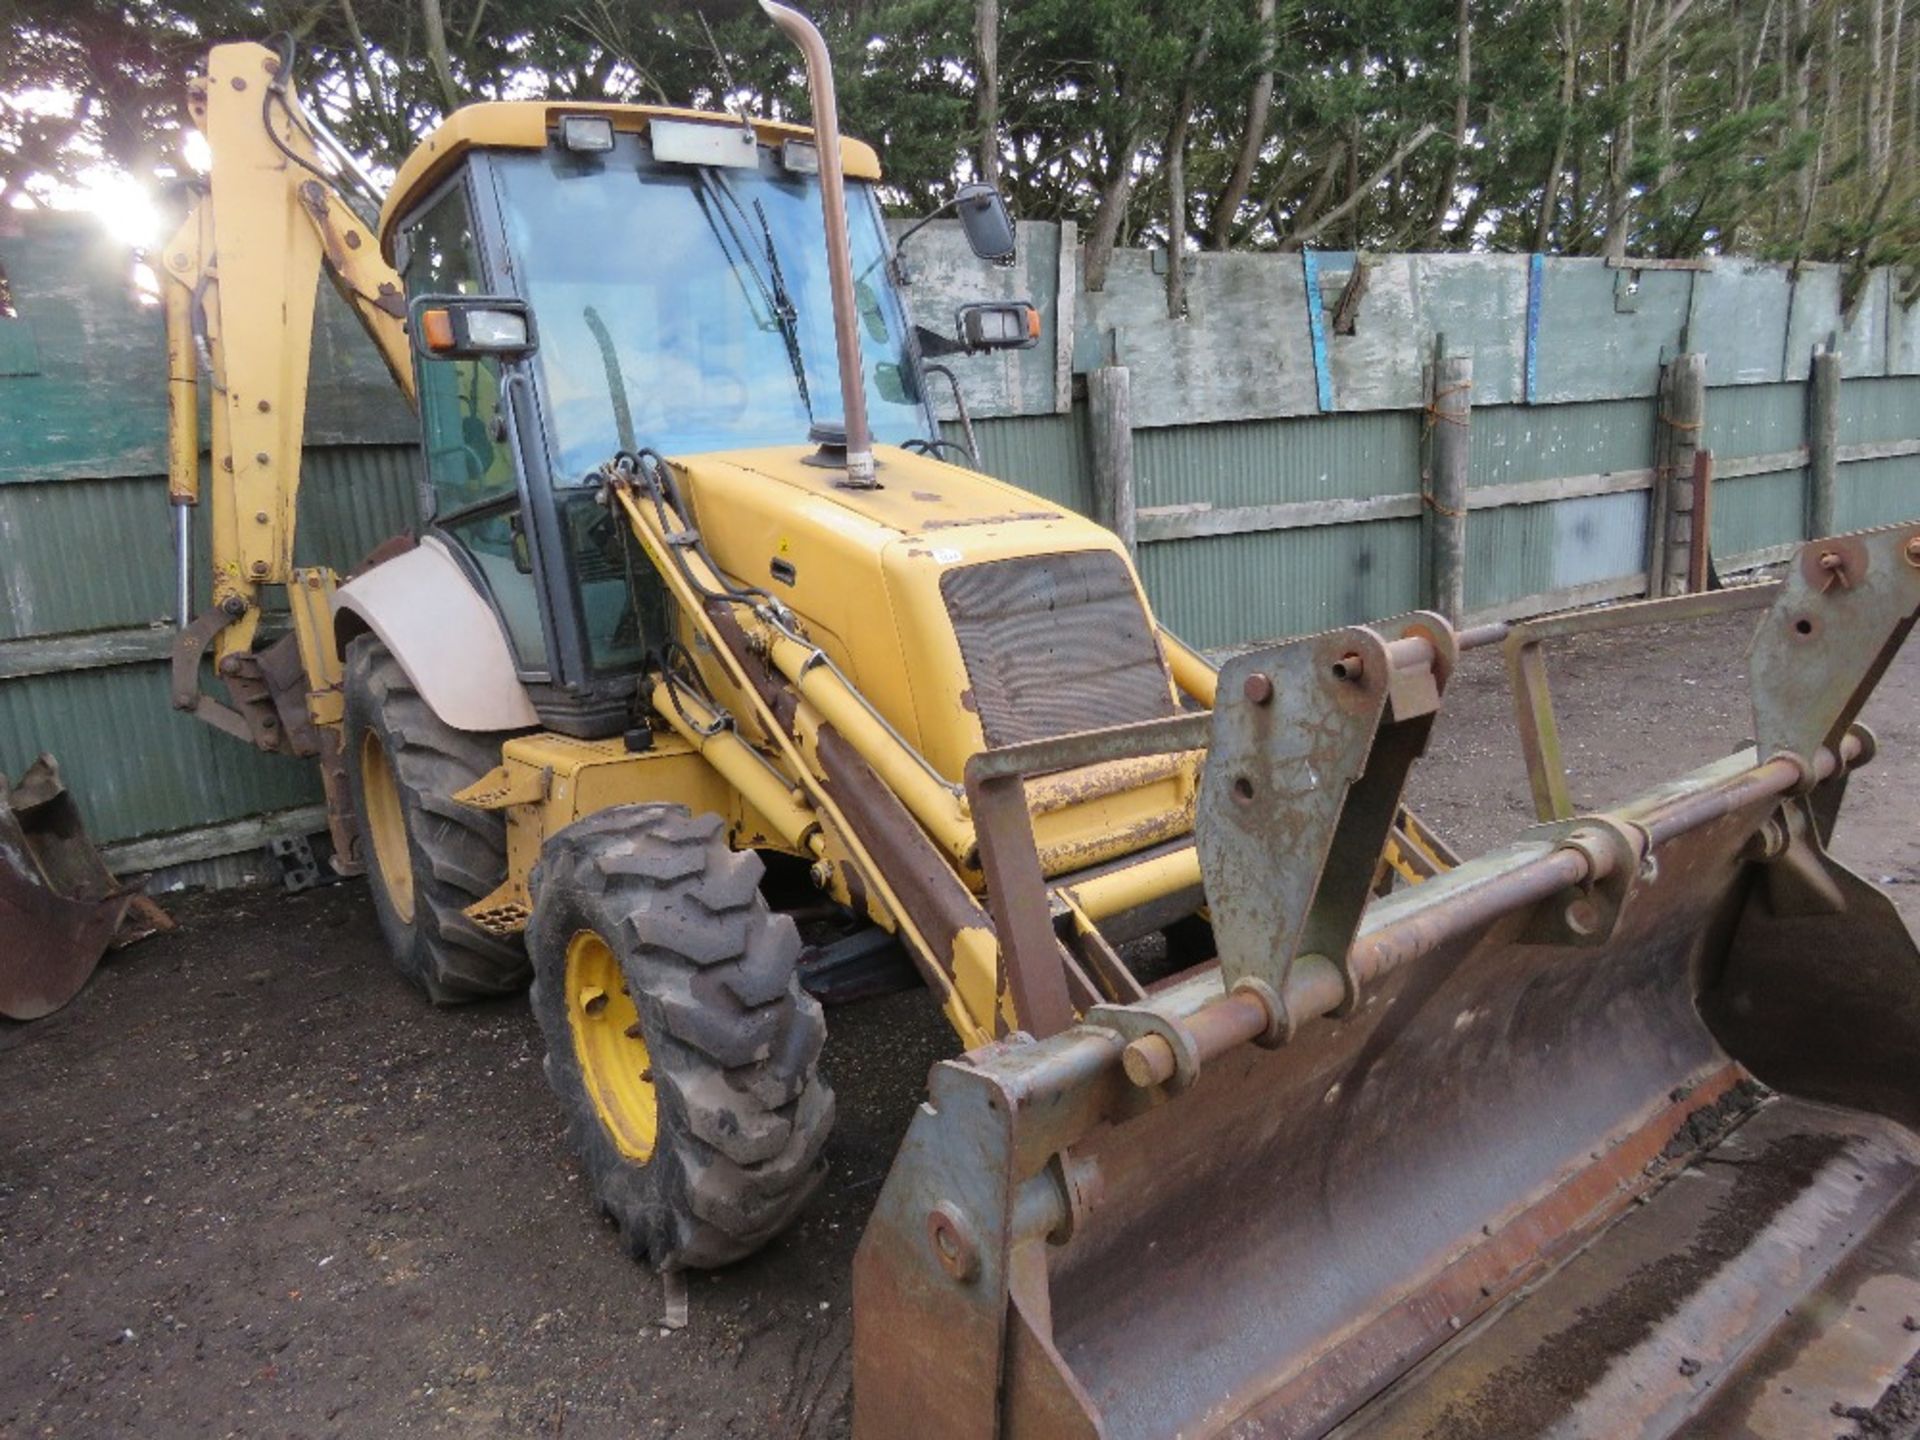 NEW HOLLAND 85 BACKHOE LOADER, REG: R978 JBJ. 8542 REC HOURS. WITH 4IN1 BUCKET AND ONE REAR BUCKET.